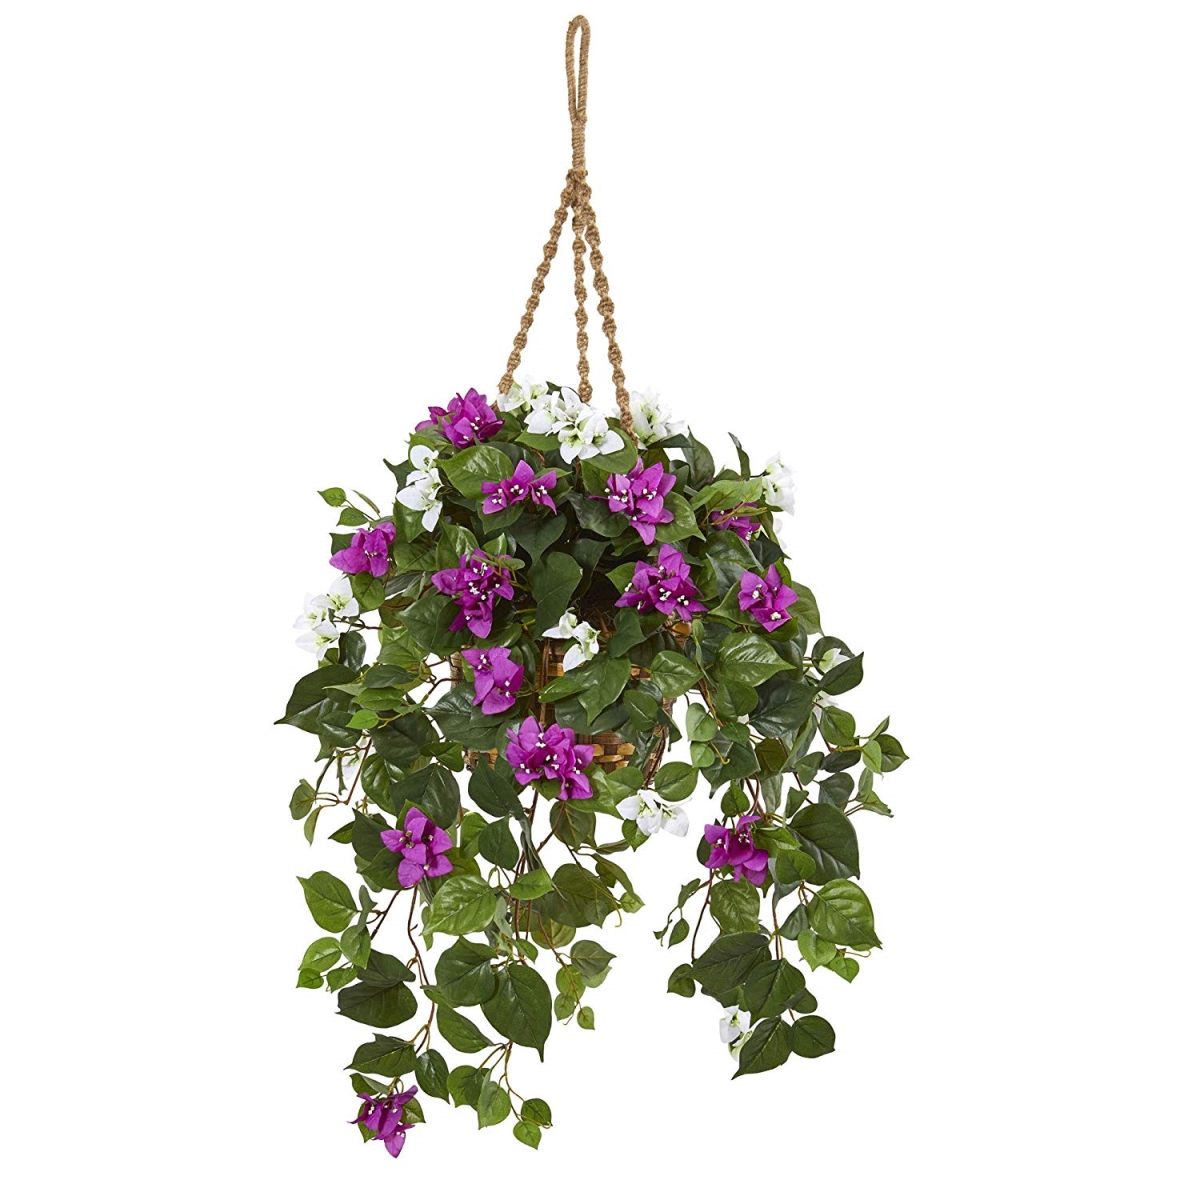 Picture of Nearly Natural 8405 30 in. Mixed Bougainvillea Artificial Plant Hanging Basket